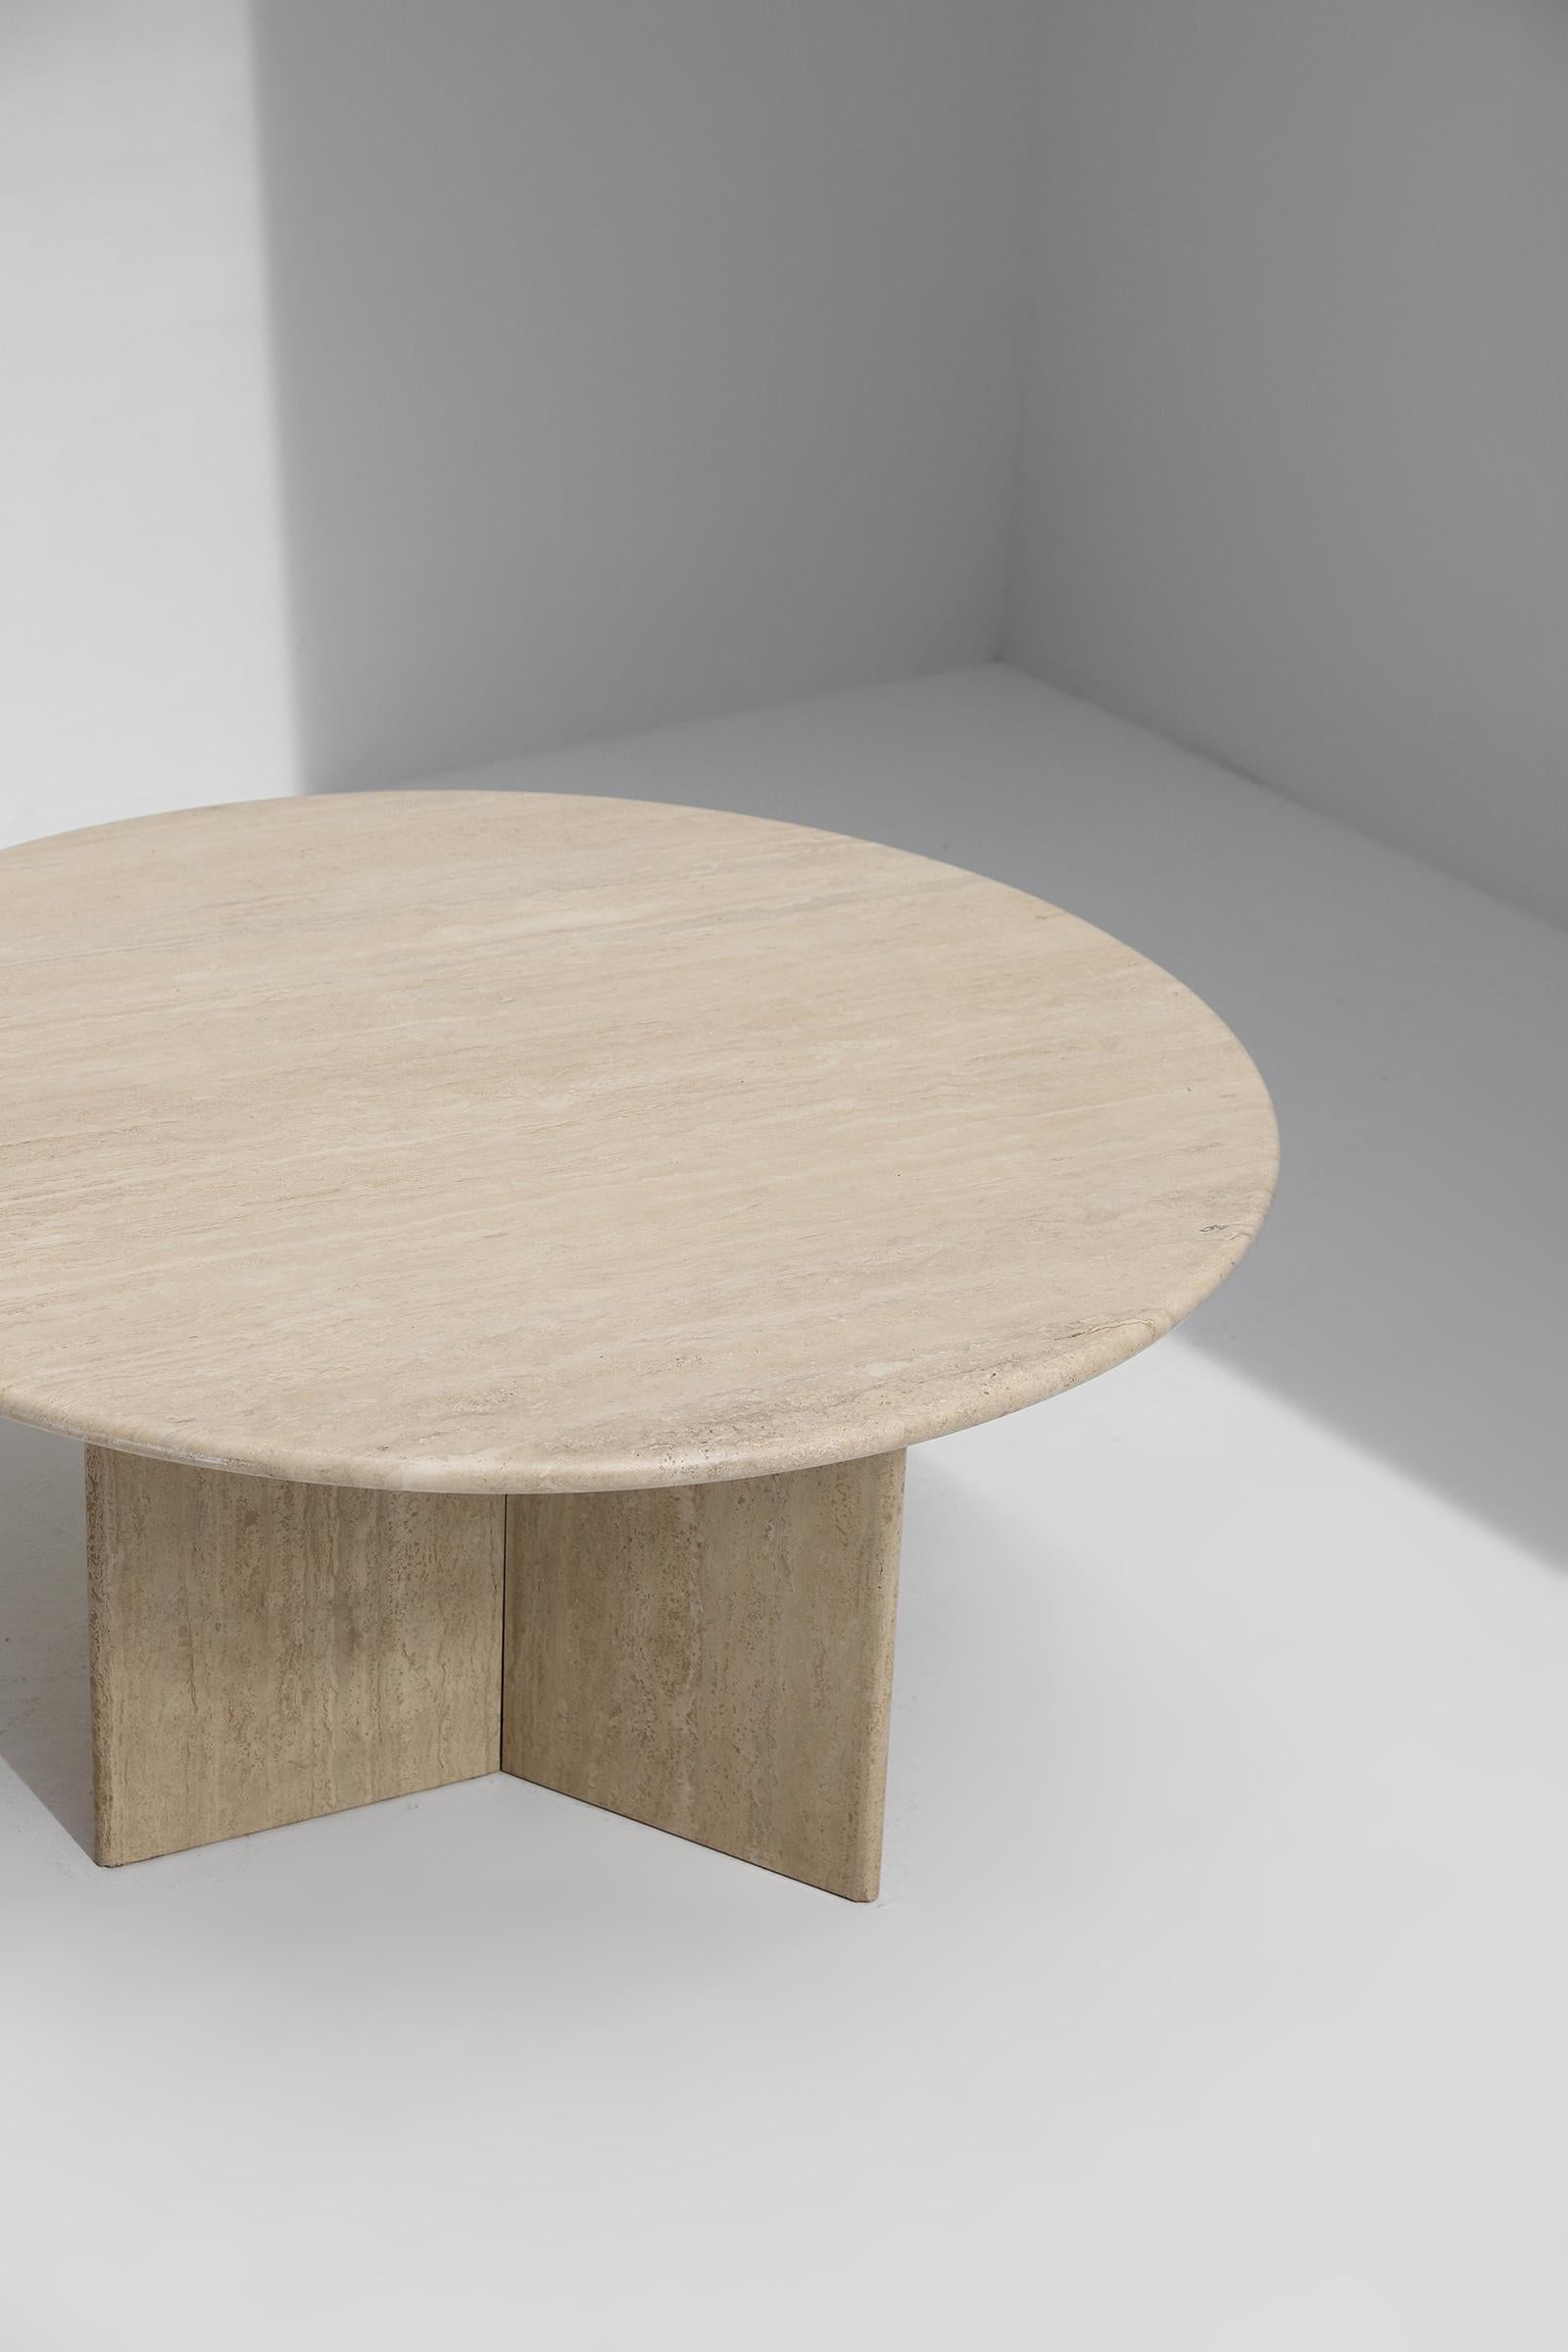 Decorative Travertine Dining Table Designed in the 1970s 1